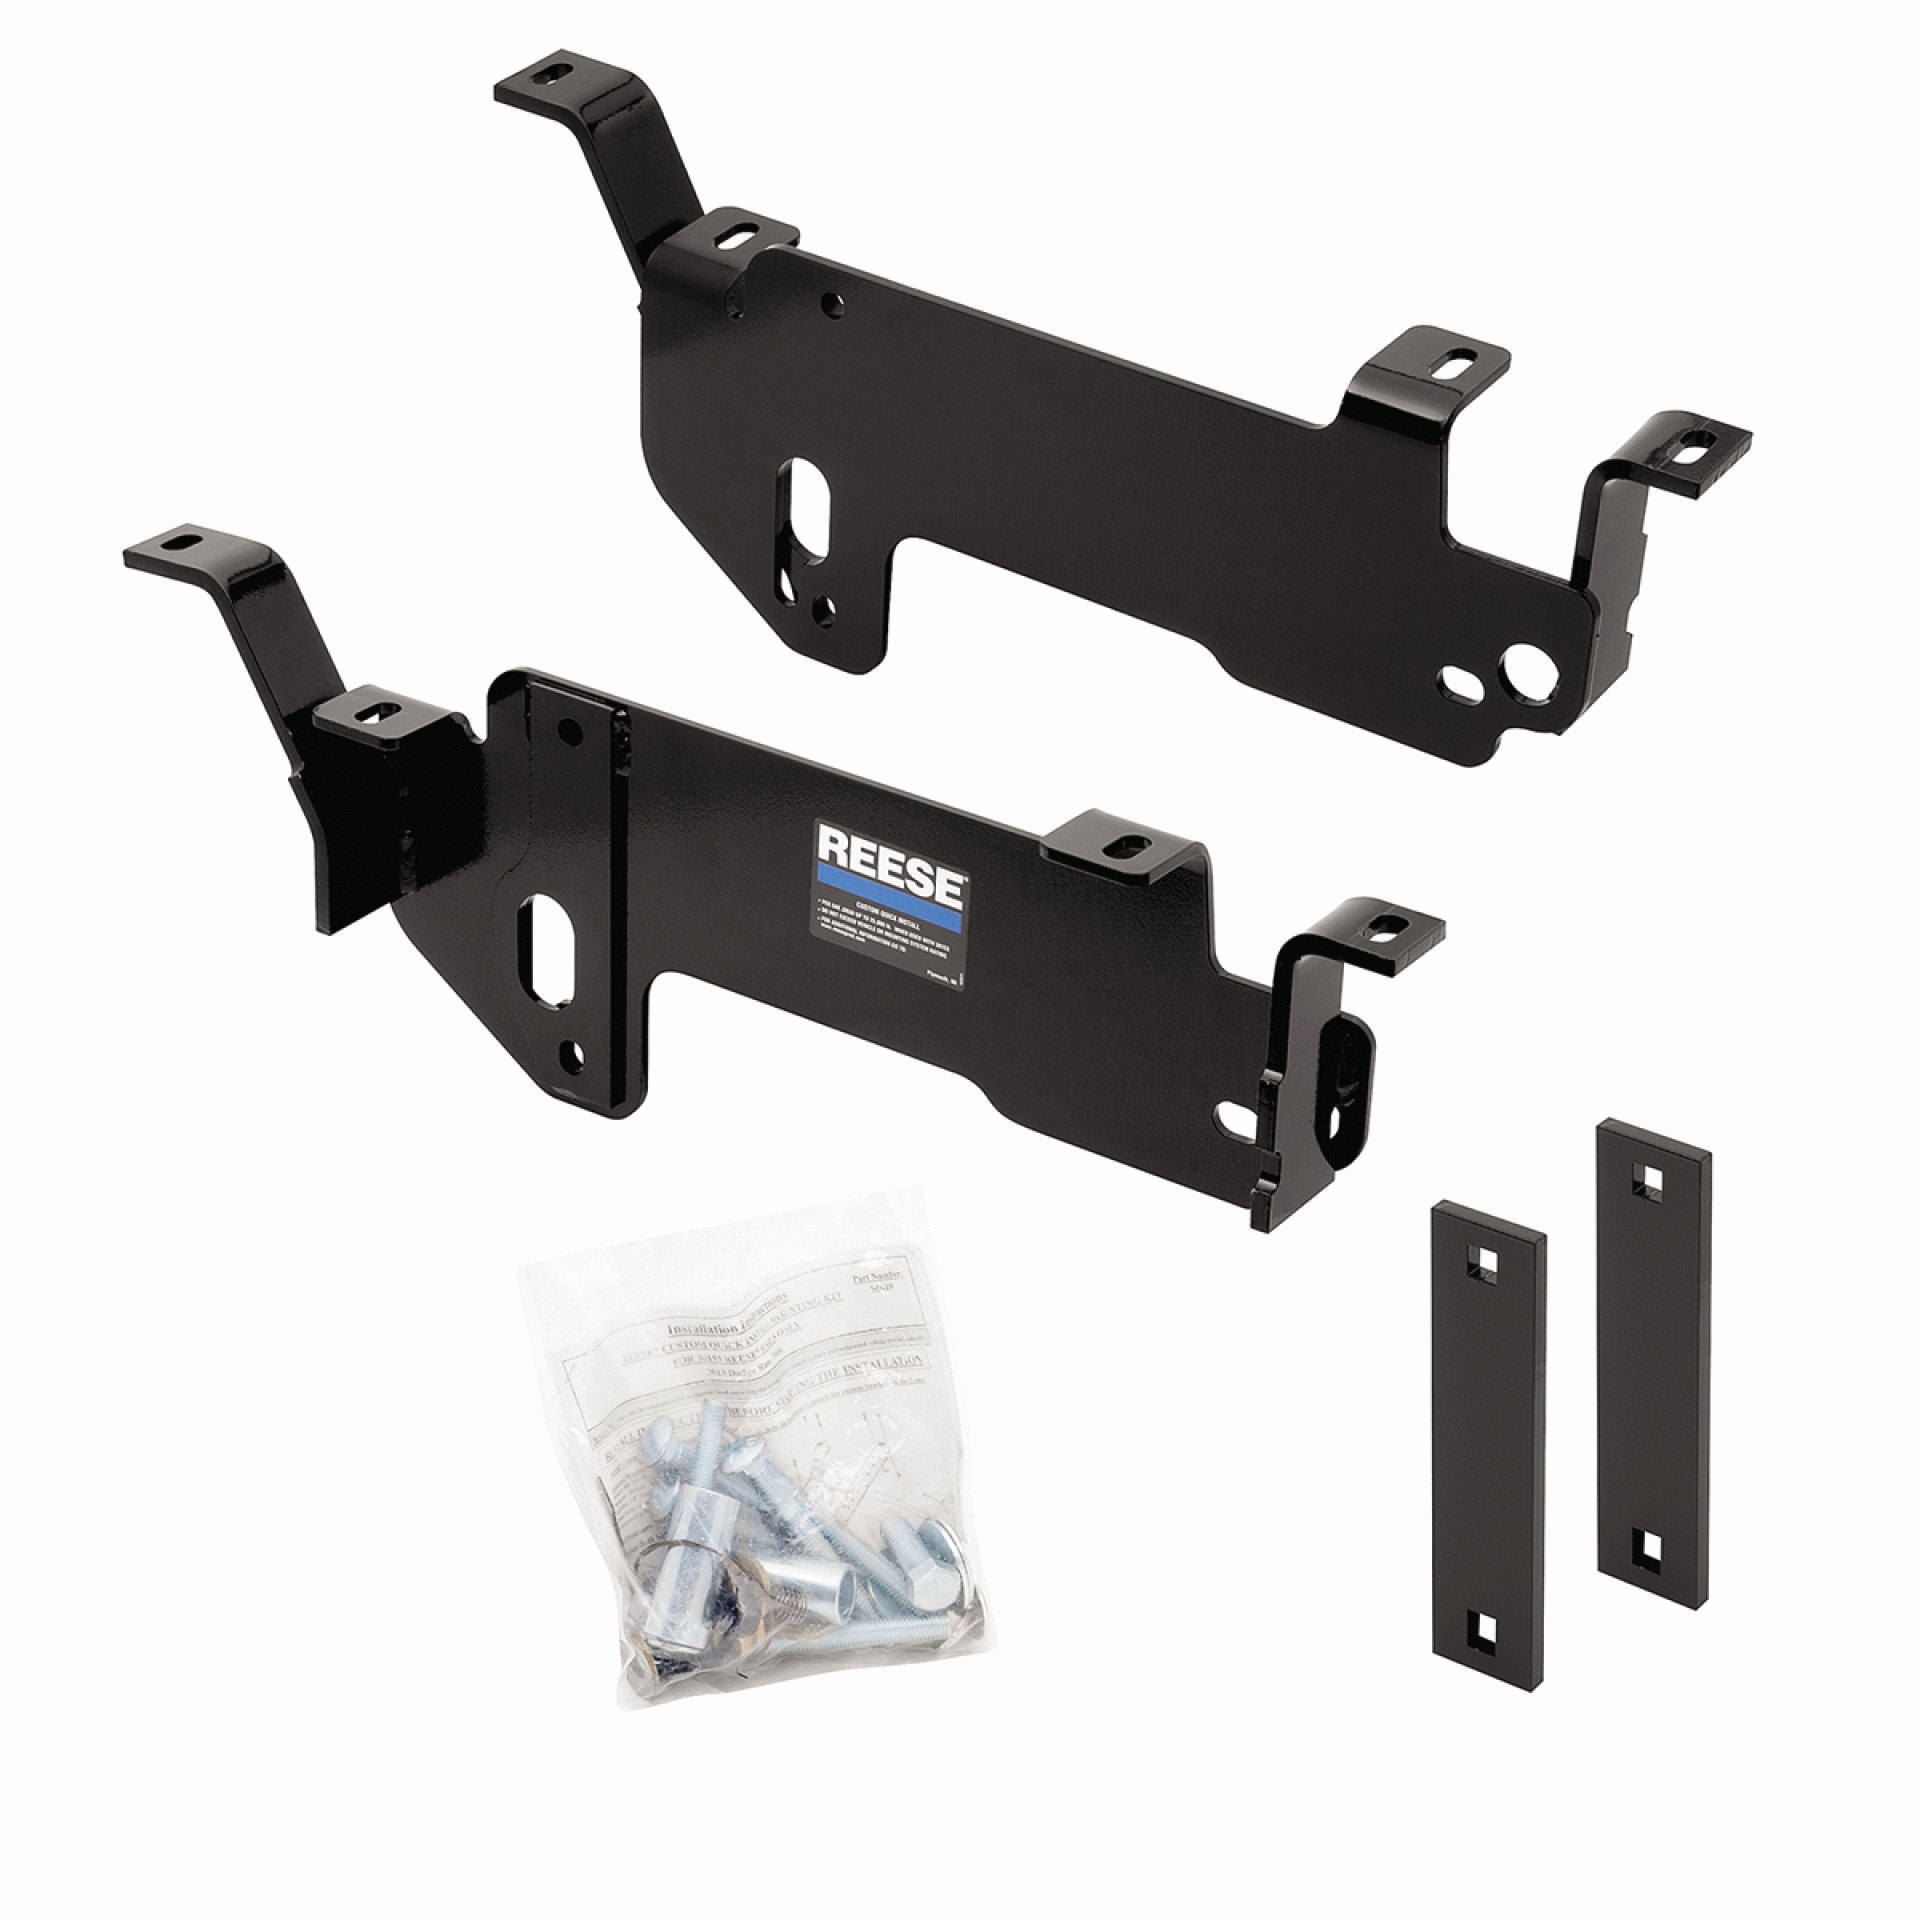 Reese | 56010 | Bracket Kit For Fifth Wheel Must Use With 5630153 Rail Kit